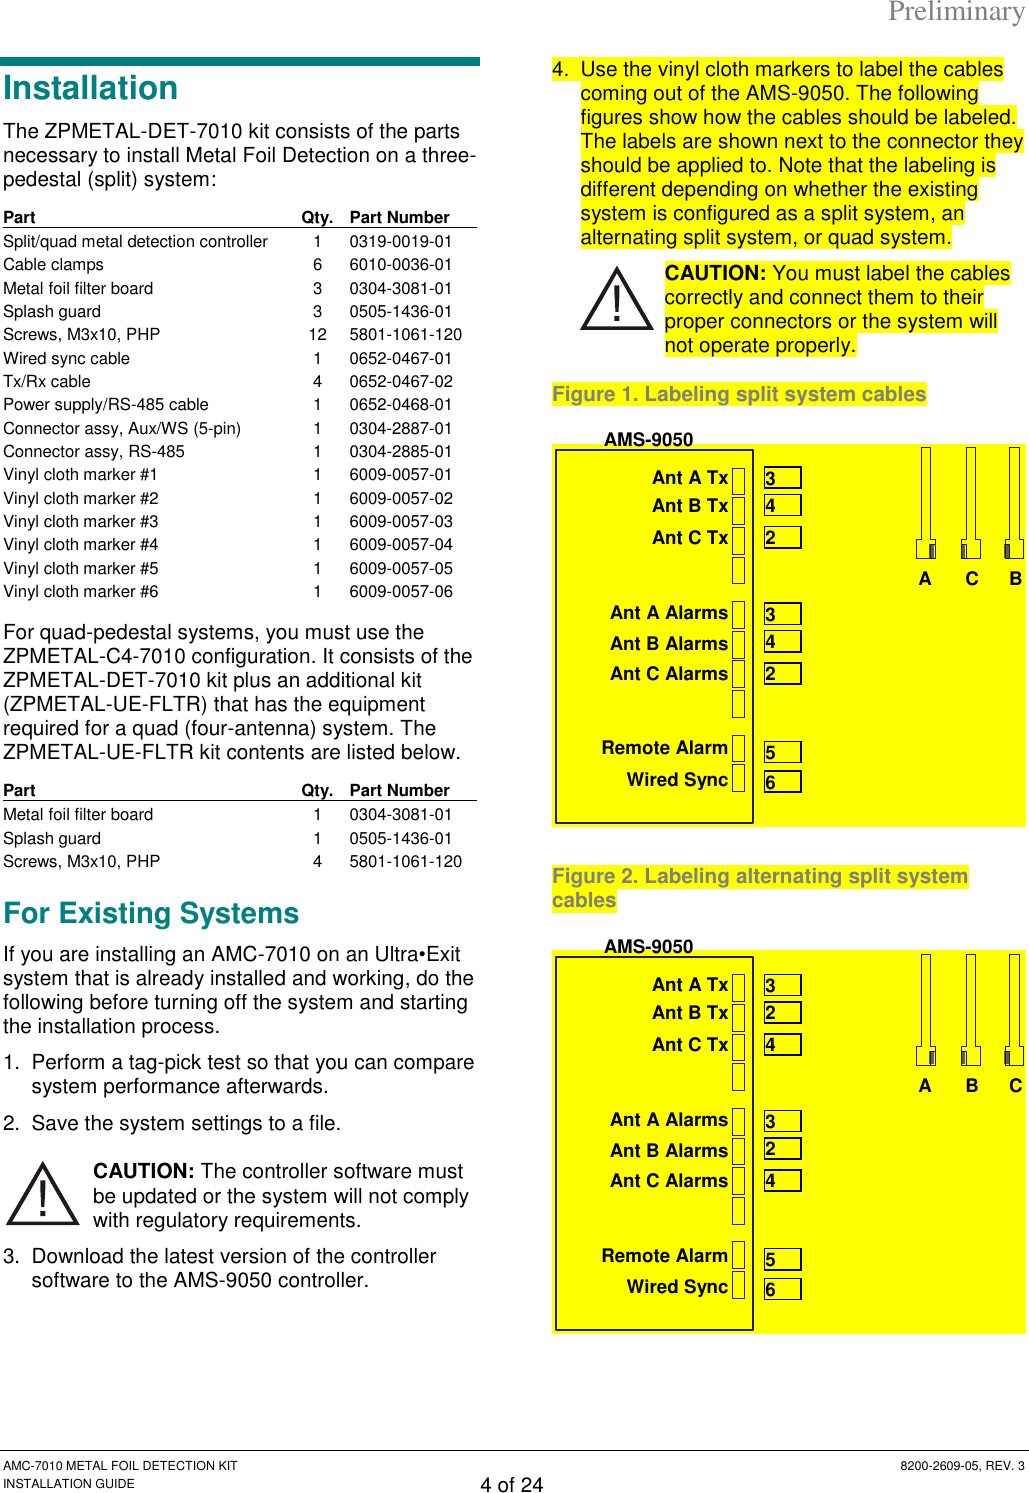 Preliminary AMC-7010 METAL FOIL DETECTION KIT  8200-2609-05, REV. 3 INSTALLATION GUIDE 4 of 24 Installation The ZPMETAL-DET-7010 kit consists of the parts necessary to install Metal Foil Detection on a three-pedestal (split) system: Part Qty. Part Number Split/quad metal detection controller 1 0319-0019-01 Cable clamps 6 6010-0036-01 Metal foil filter board 3 0304-3081-01 Splash guard 3 0505-1436-01 Screws, M3x10, PHP 12 5801-1061-120 Wired sync cable 1 0652-0467-01 Tx/Rx cable 4 0652-0467-02 Power supply/RS-485 cable 1 0652-0468-01 Connector assy, Aux/WS (5-pin) 1 0304-2887-01 Connector assy, RS-485  1 0304-2885-01 Vinyl cloth marker #1 1 6009-0057-01 Vinyl cloth marker #2 1 6009-0057-02 Vinyl cloth marker #3 1 6009-0057-03 Vinyl cloth marker #4 1 6009-0057-04 Vinyl cloth marker #5 1 6009-0057-05 Vinyl cloth marker #6 1 6009-0057-06  For quad-pedestal systems, you must use the ZPMETAL-C4-7010 configuration. It consists of the ZPMETAL-DET-7010 kit plus an additional kit (ZPMETAL-UE-FLTR) that has the equipment required for a quad (four-antenna) system. The ZPMETAL-UE-FLTR kit contents are listed below. Part Qty. Part Number Metal foil filter board 1 0304-3081-01 Splash guard 1 0505-1436-01 Screws, M3x10, PHP 4 5801-1061-120 For Existing Systems If you are installing an AMC-7010 on an Ultra•Exit system that is already installed and working, do the following before turning off the system and starting the installation process. 1.  Perform a tag-pick test so that you can compare system performance afterwards. 2.  Save the system settings to a file. CAUTION: The controller software must be updated or the system will not comply with regulatory requirements. 3.  Download the latest version of the controller software to the AMS-9050 controller.  4.  Use the vinyl cloth markers to label the cables coming out of the AMS-9050. The following figures show how the cables should be labeled. The labels are shown next to the connector they should be applied to. Note that the labeling is different depending on whether the existing system is configured as a split system, an alternating split system, or quad system. CAUTION: You must label the cables correctly and connect them to their proper connectors or the system will not operate properly. Figure 1. Labeling split system cables  Figure 2. Labeling alternating split system cables  Wired Sync Remote Alarm Ant B Tx Ant C Tx Ant A Alarms Ant B Alarms Ant C Alarms Ant A Tx 3 4 2 3 4 2 5 6 A AMS-9050 C B Wired Sync Remote Alarm Ant B Tx Ant C Tx Ant A Alarms Ant B Alarms Ant C Alarms Ant A Tx 3 2 4 3 2 4 5 6 A AMS-9050 B C 